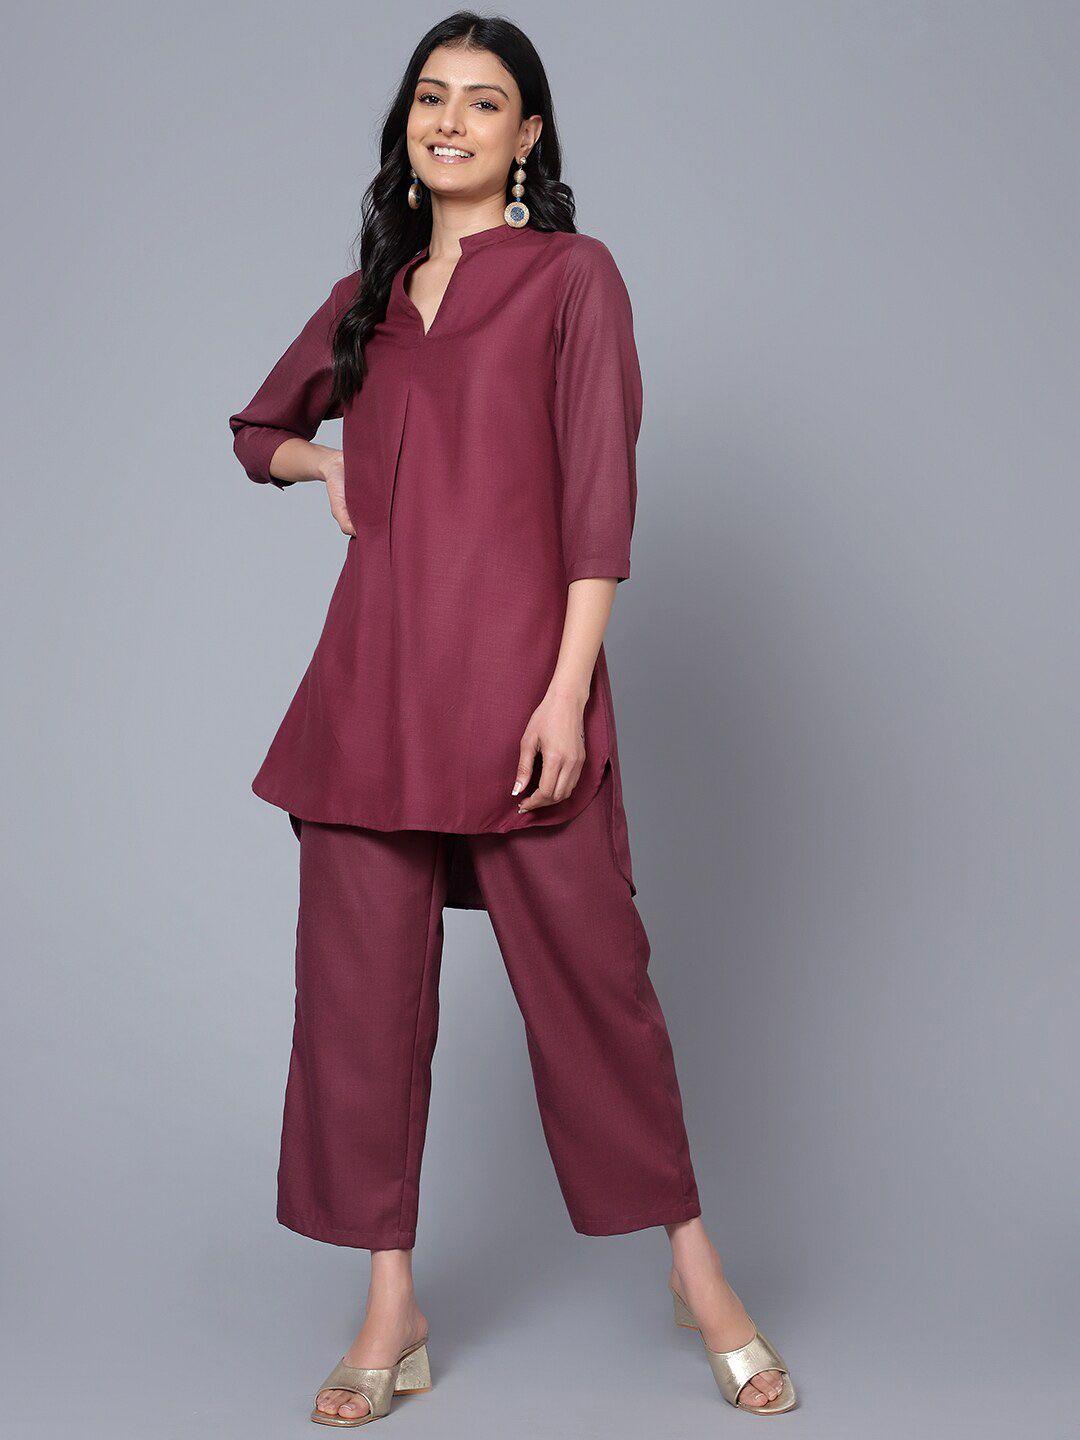 baesd tunic & trousers co-ords